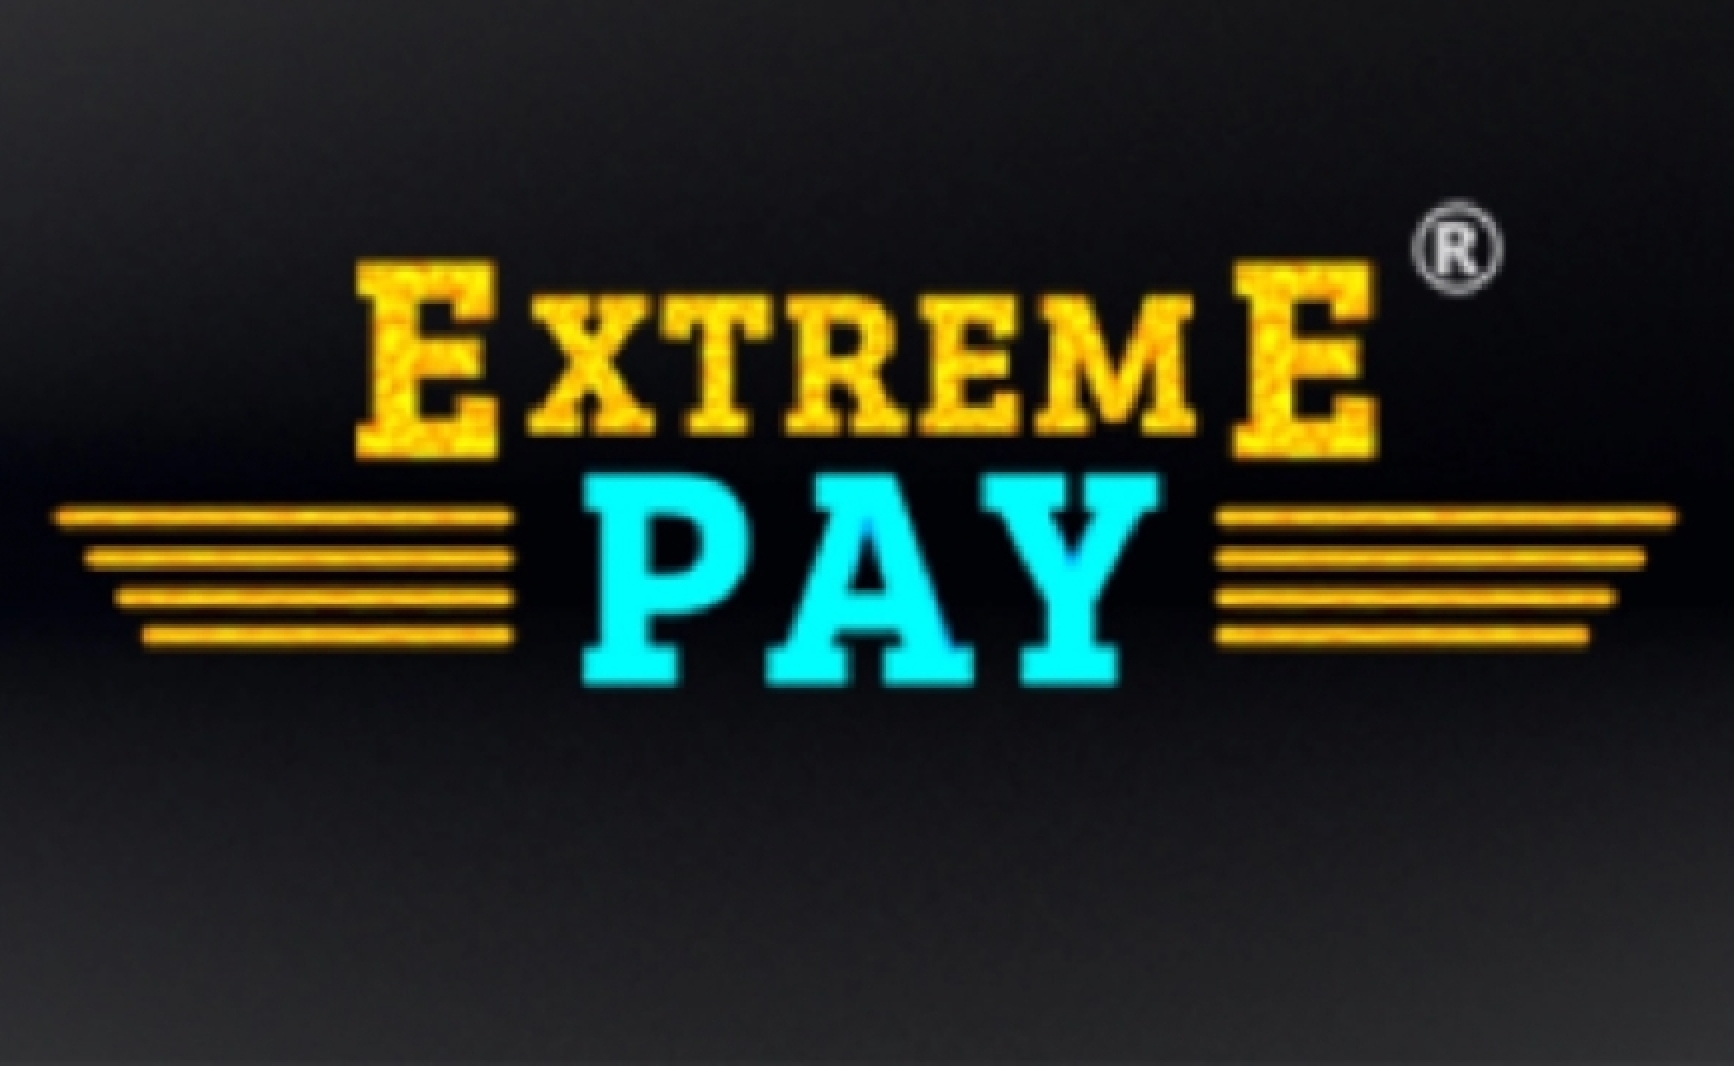 Extreme Pay demo